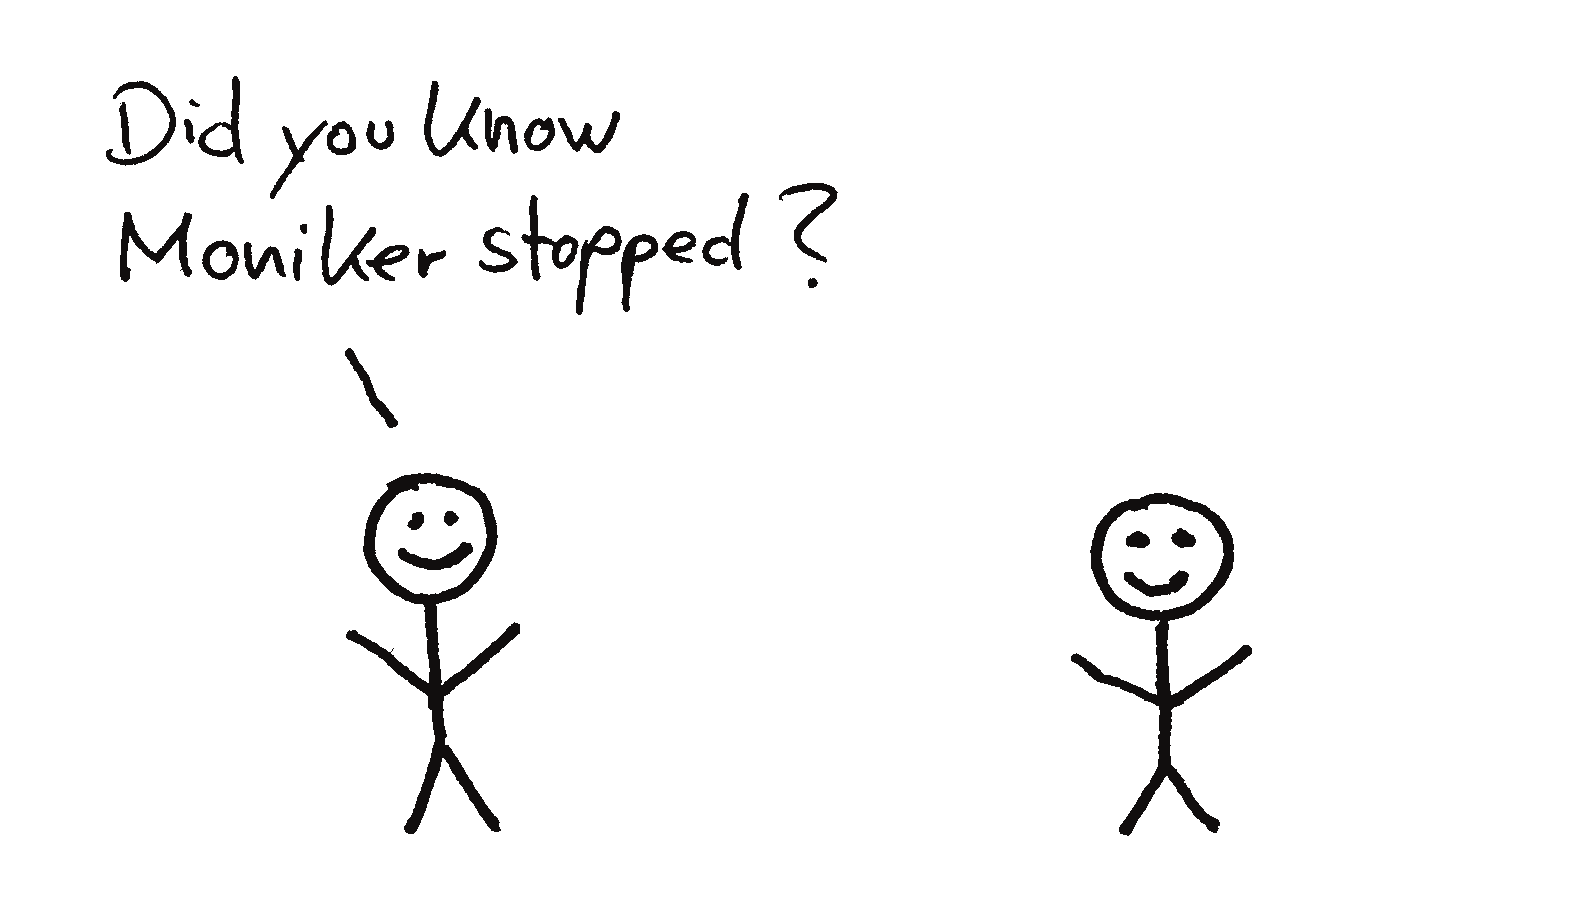 An animation of two stick figures talking about how former Studio Moniker now wants to embrace friction.